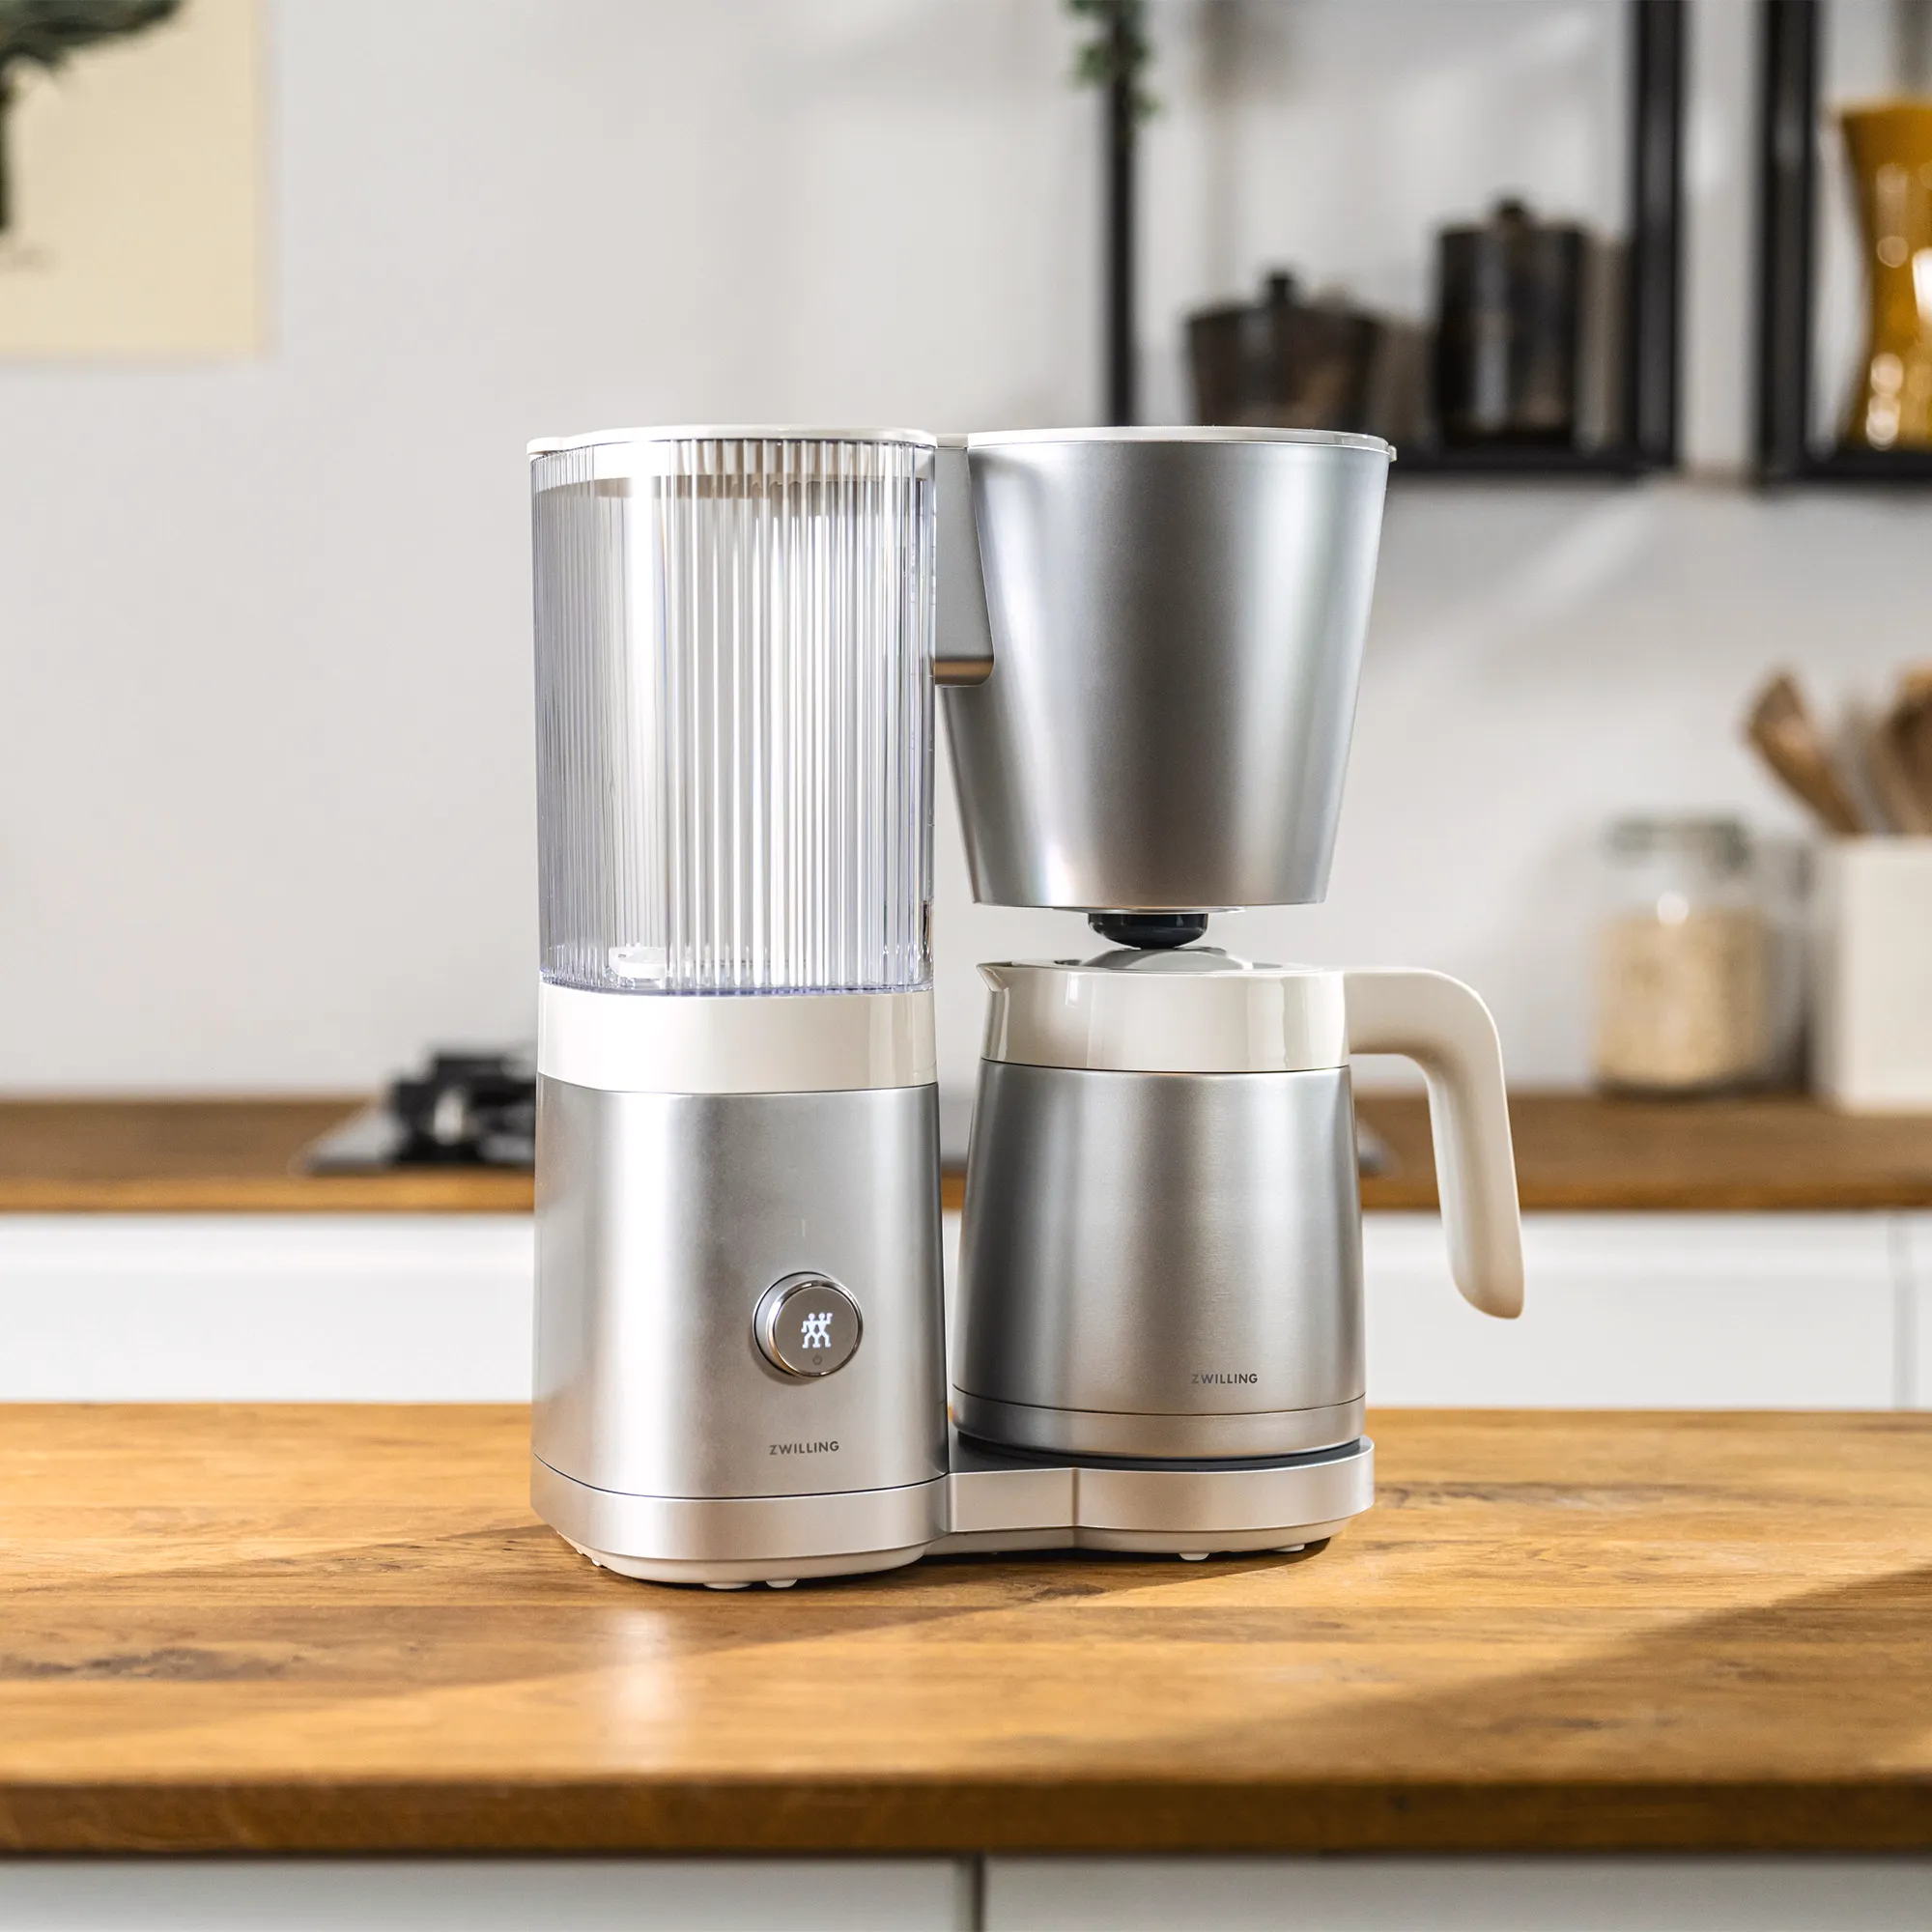 https://www.homethreads.com/files/zwilling/1023536-zwilling-enfinigy-drip-coffee-maker-with-thermo-carafe-10-cup-awarded-the-sca-golden-cup-standard-silver-6.webp